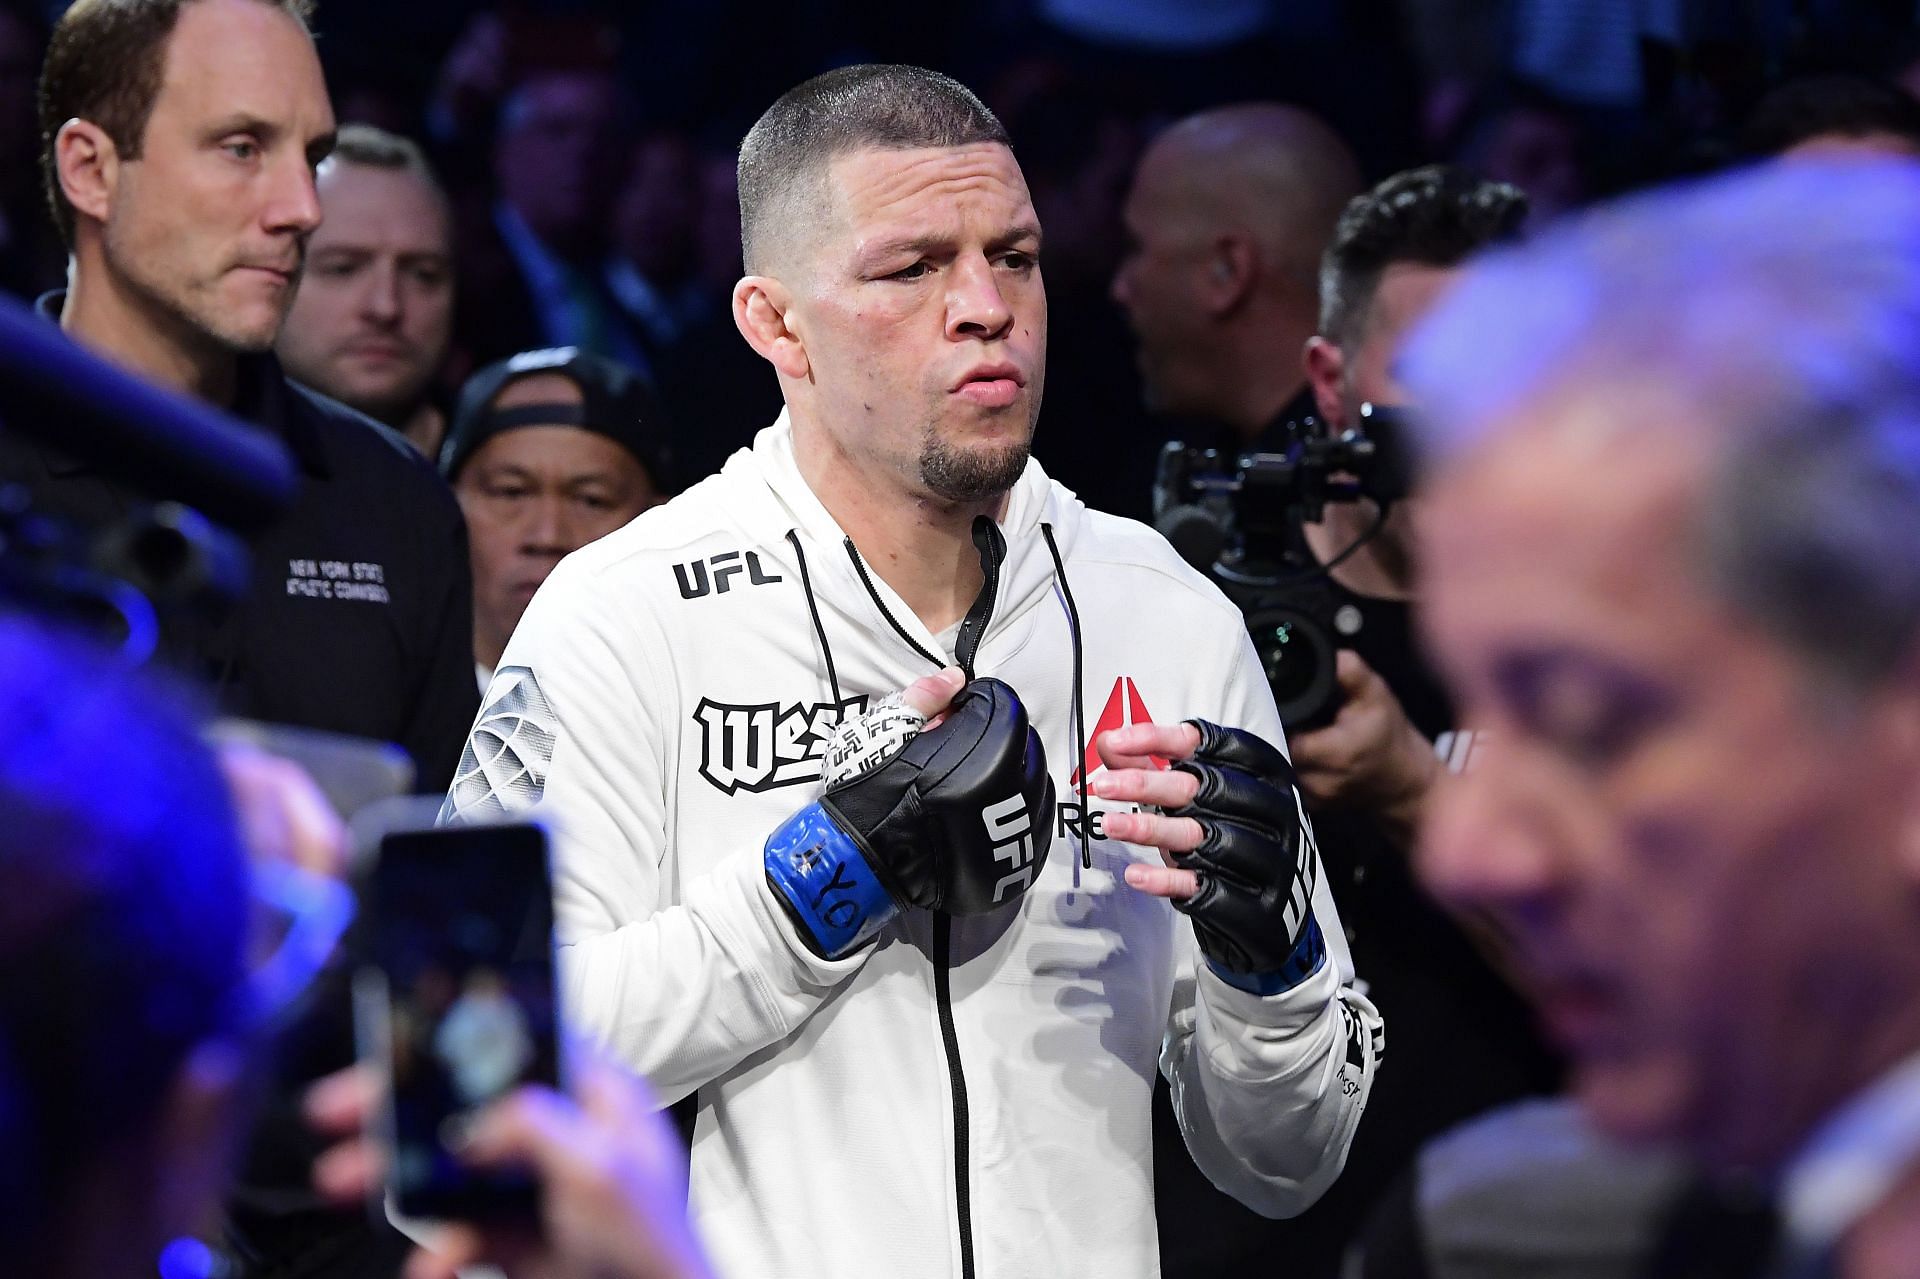 Nate Diaz has a record of 20-13